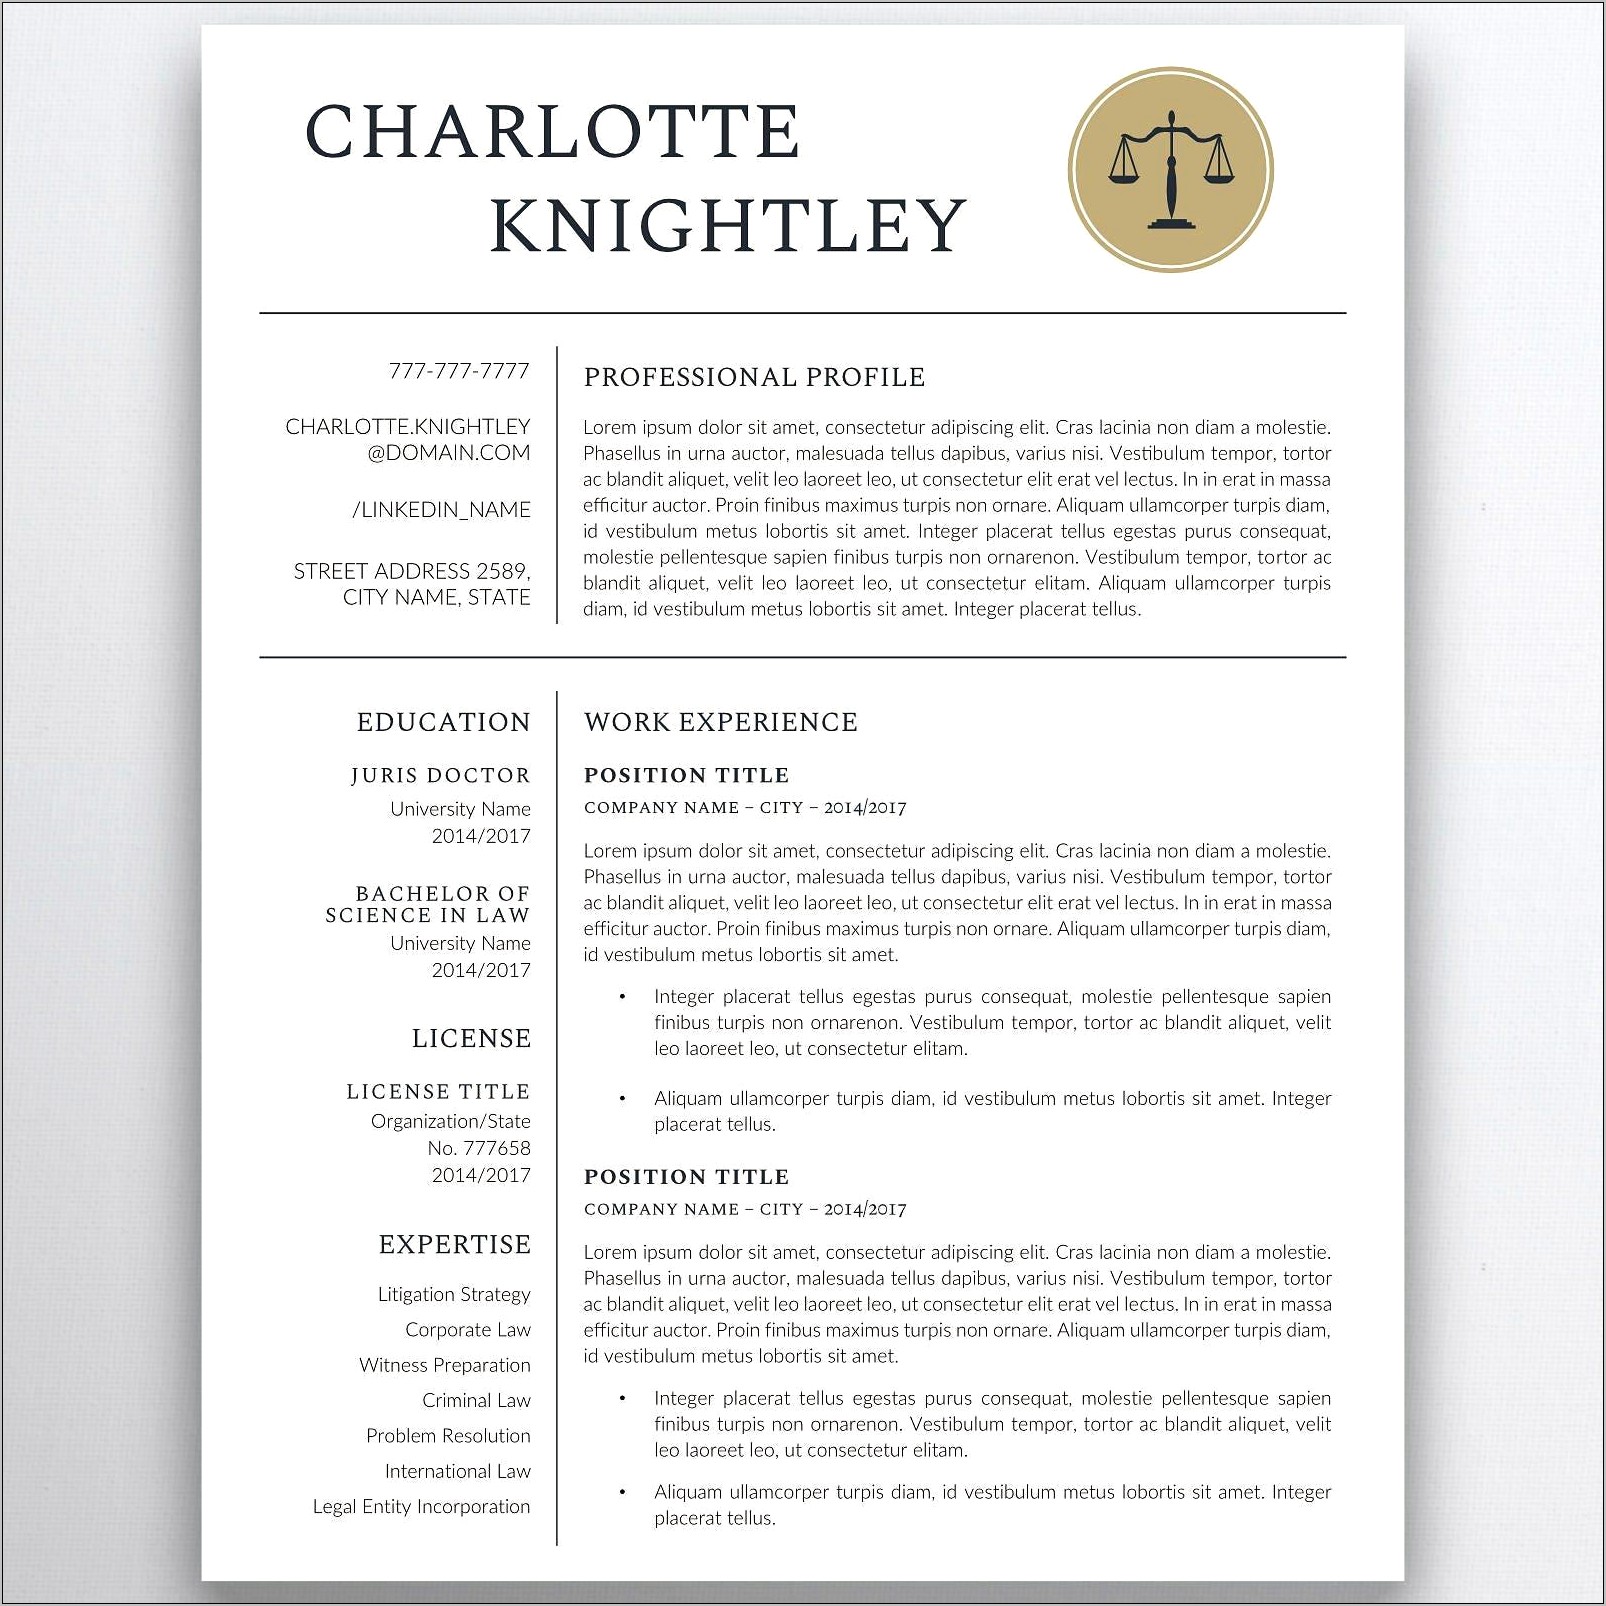 Corporate Counsel Lawyer Resume Sample